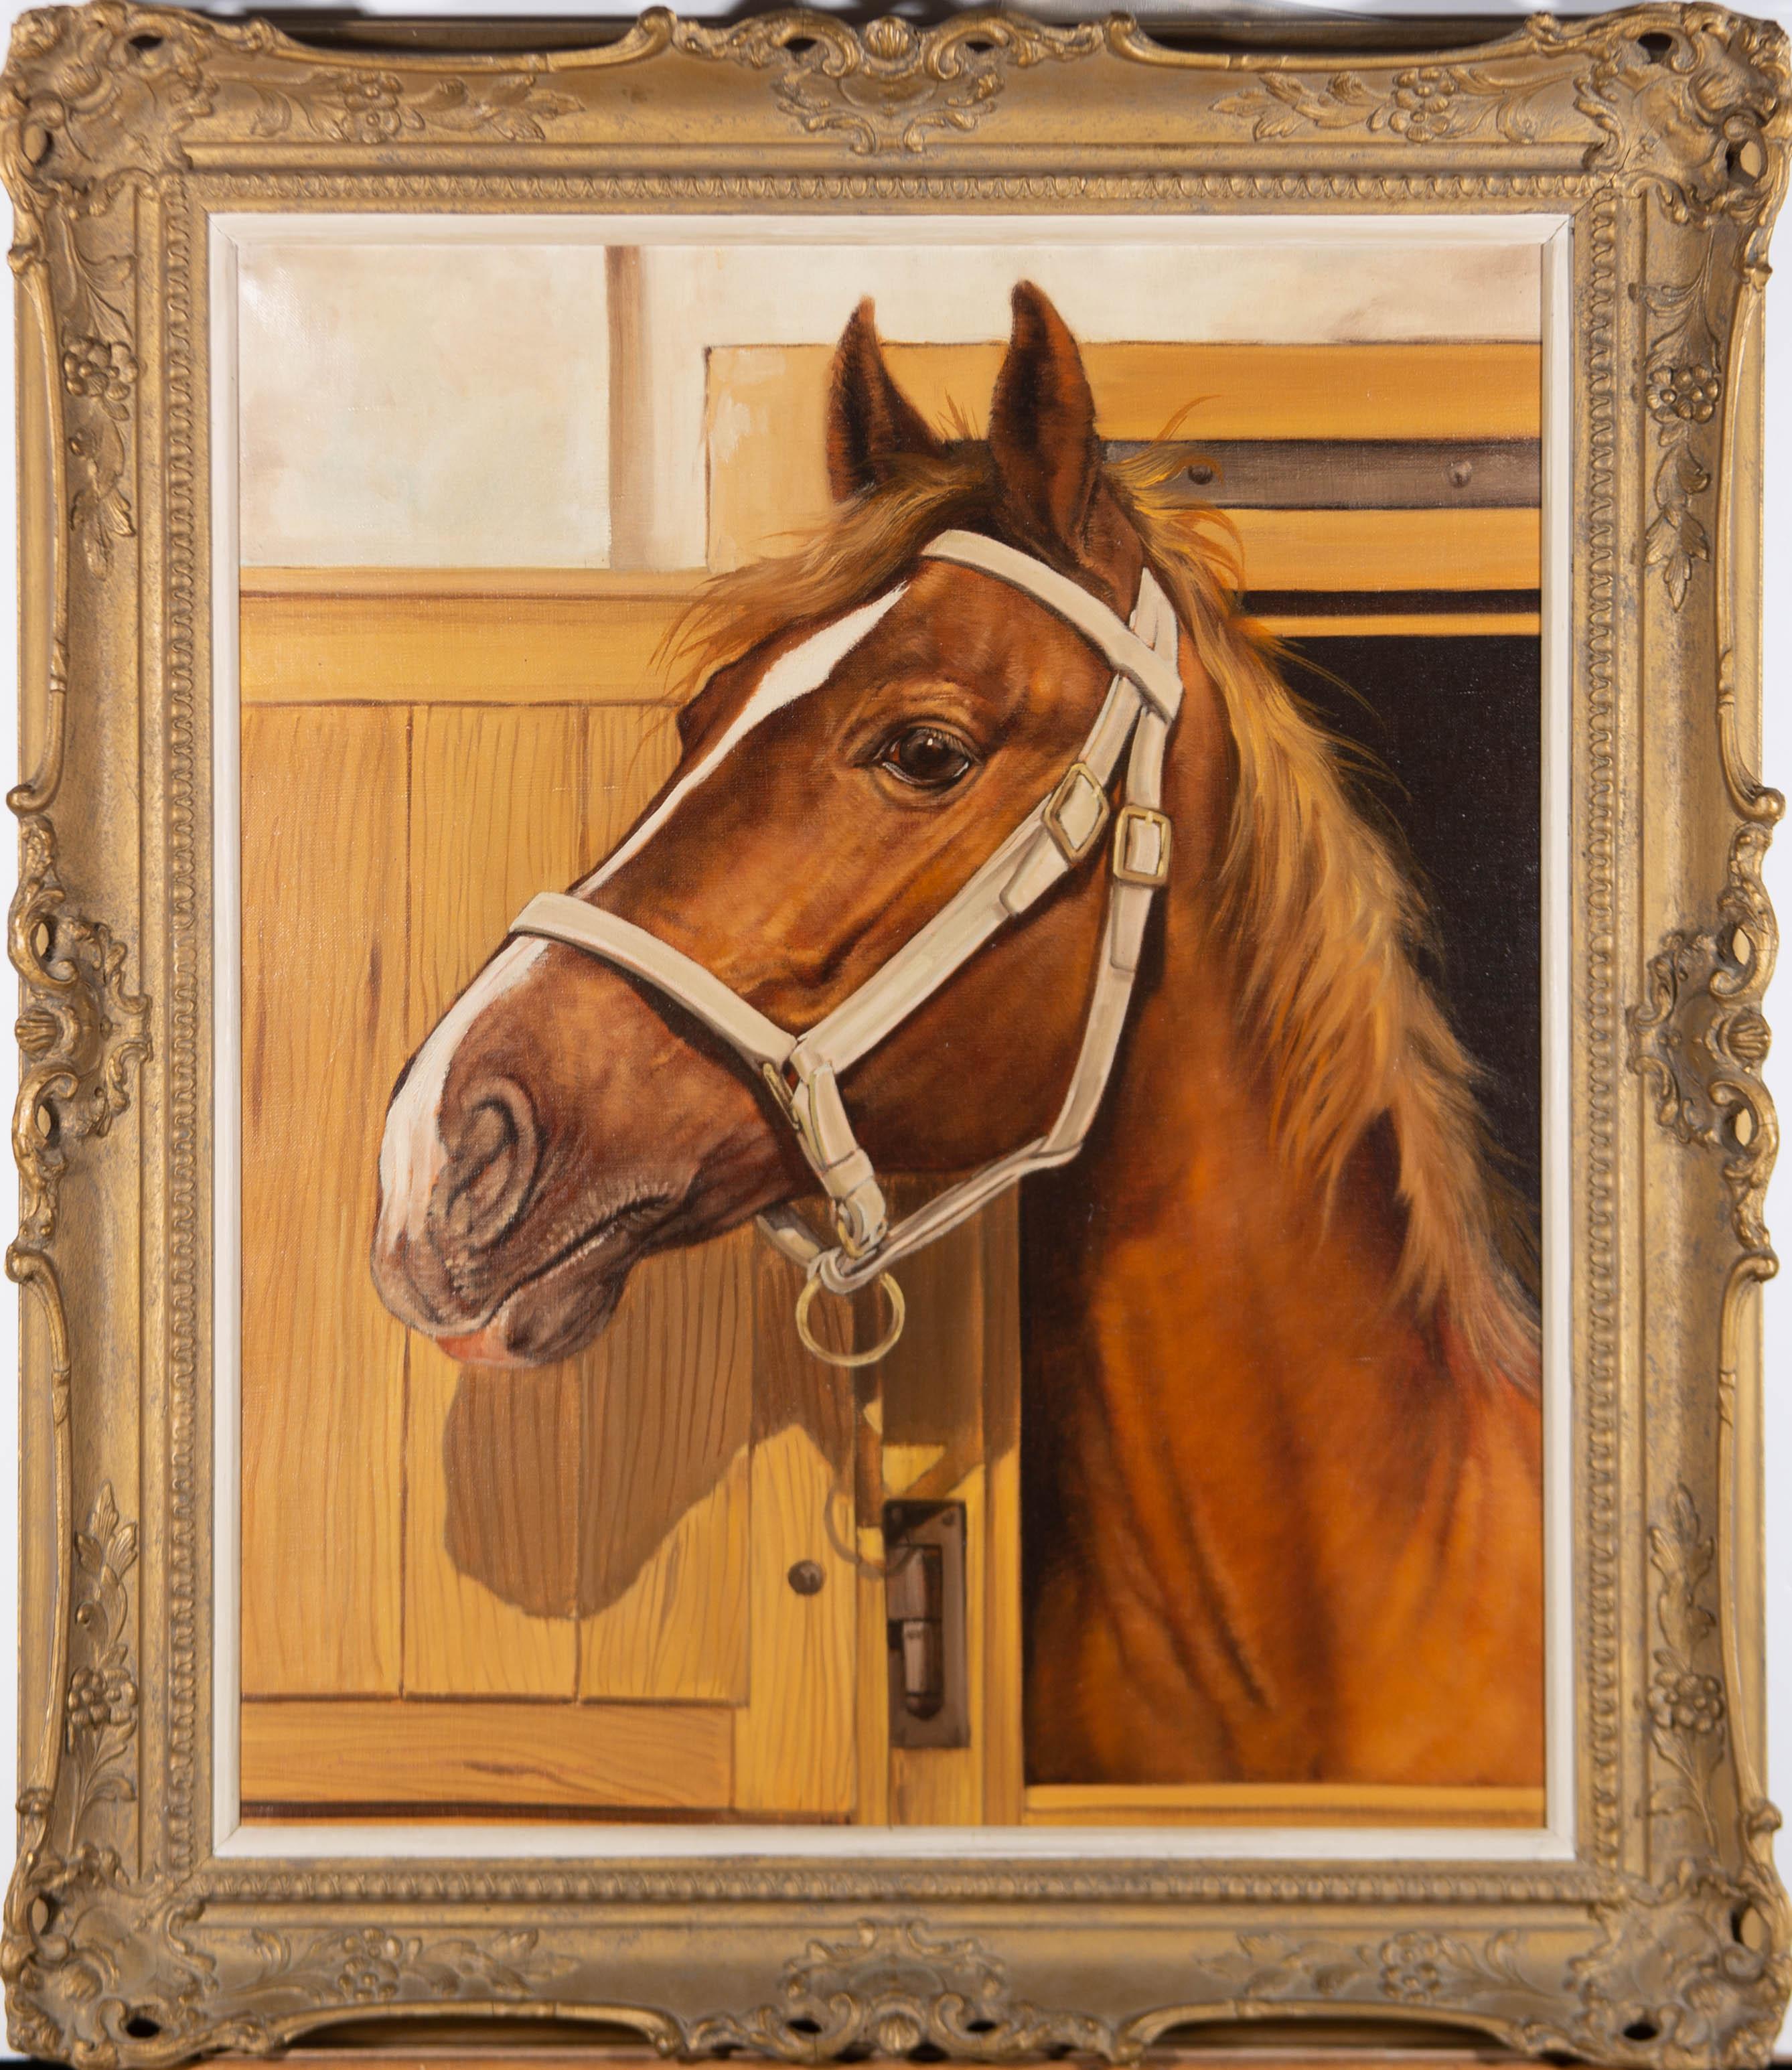 A finely painted study of a horse at a stable door by Osvald Hinteregger (b.1920). With W. Cutler, Fine Art Dealer invoice dated 1974 fixed to the reverse. Well presented in an ornate gilt effect frame. Unsigned. On canvas on stretchers.
